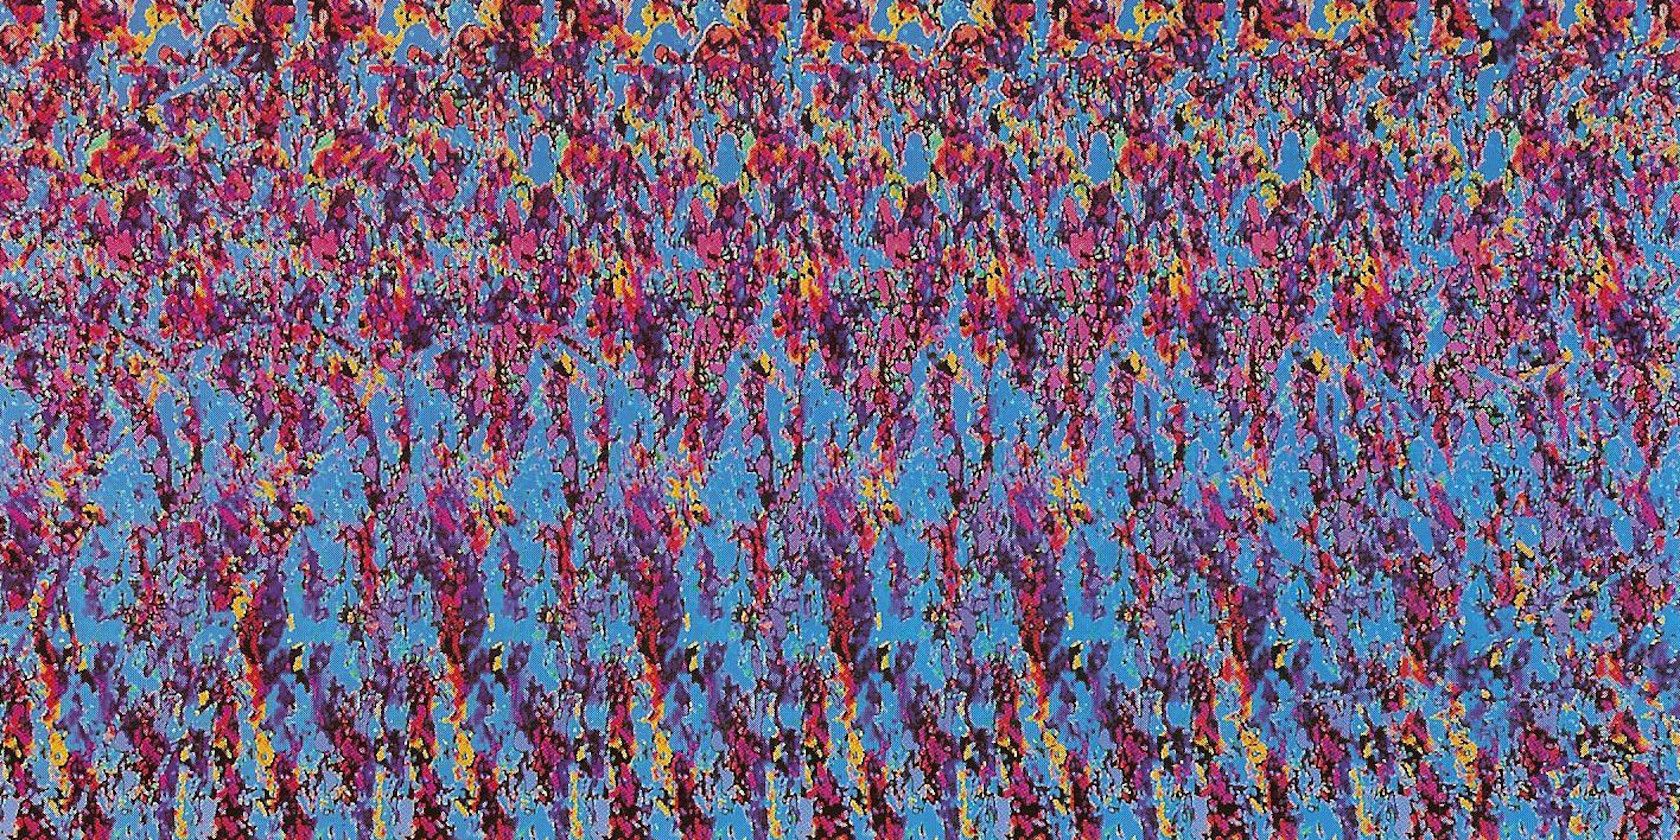 stereogram with answers